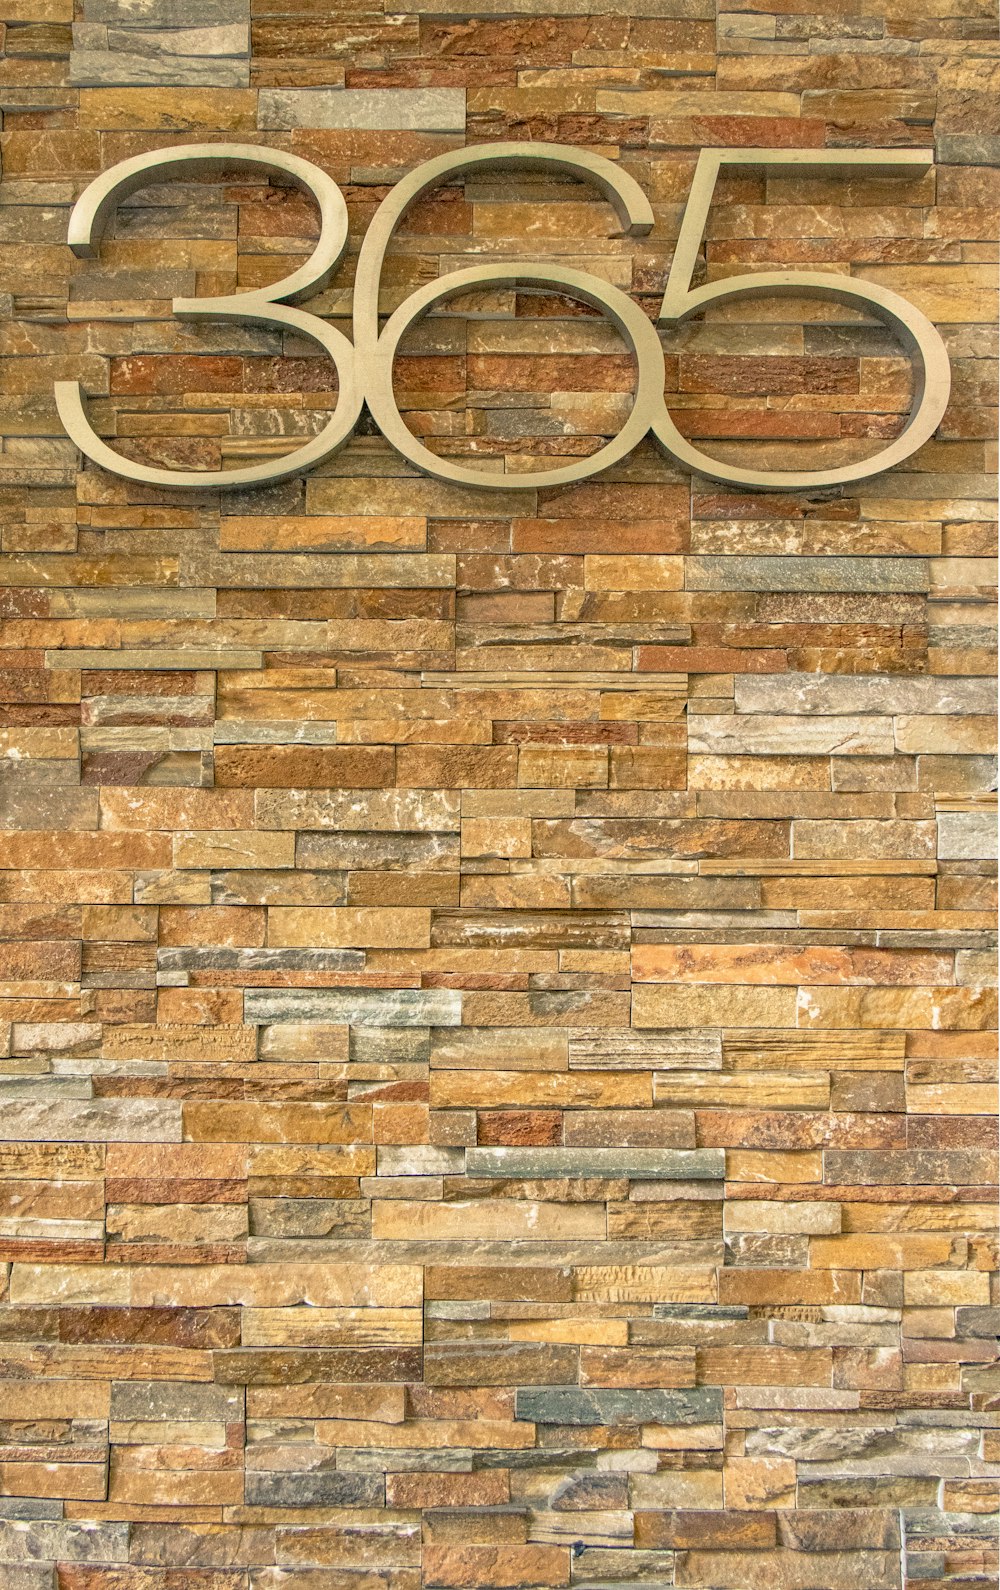 365 cutout number on brick wall